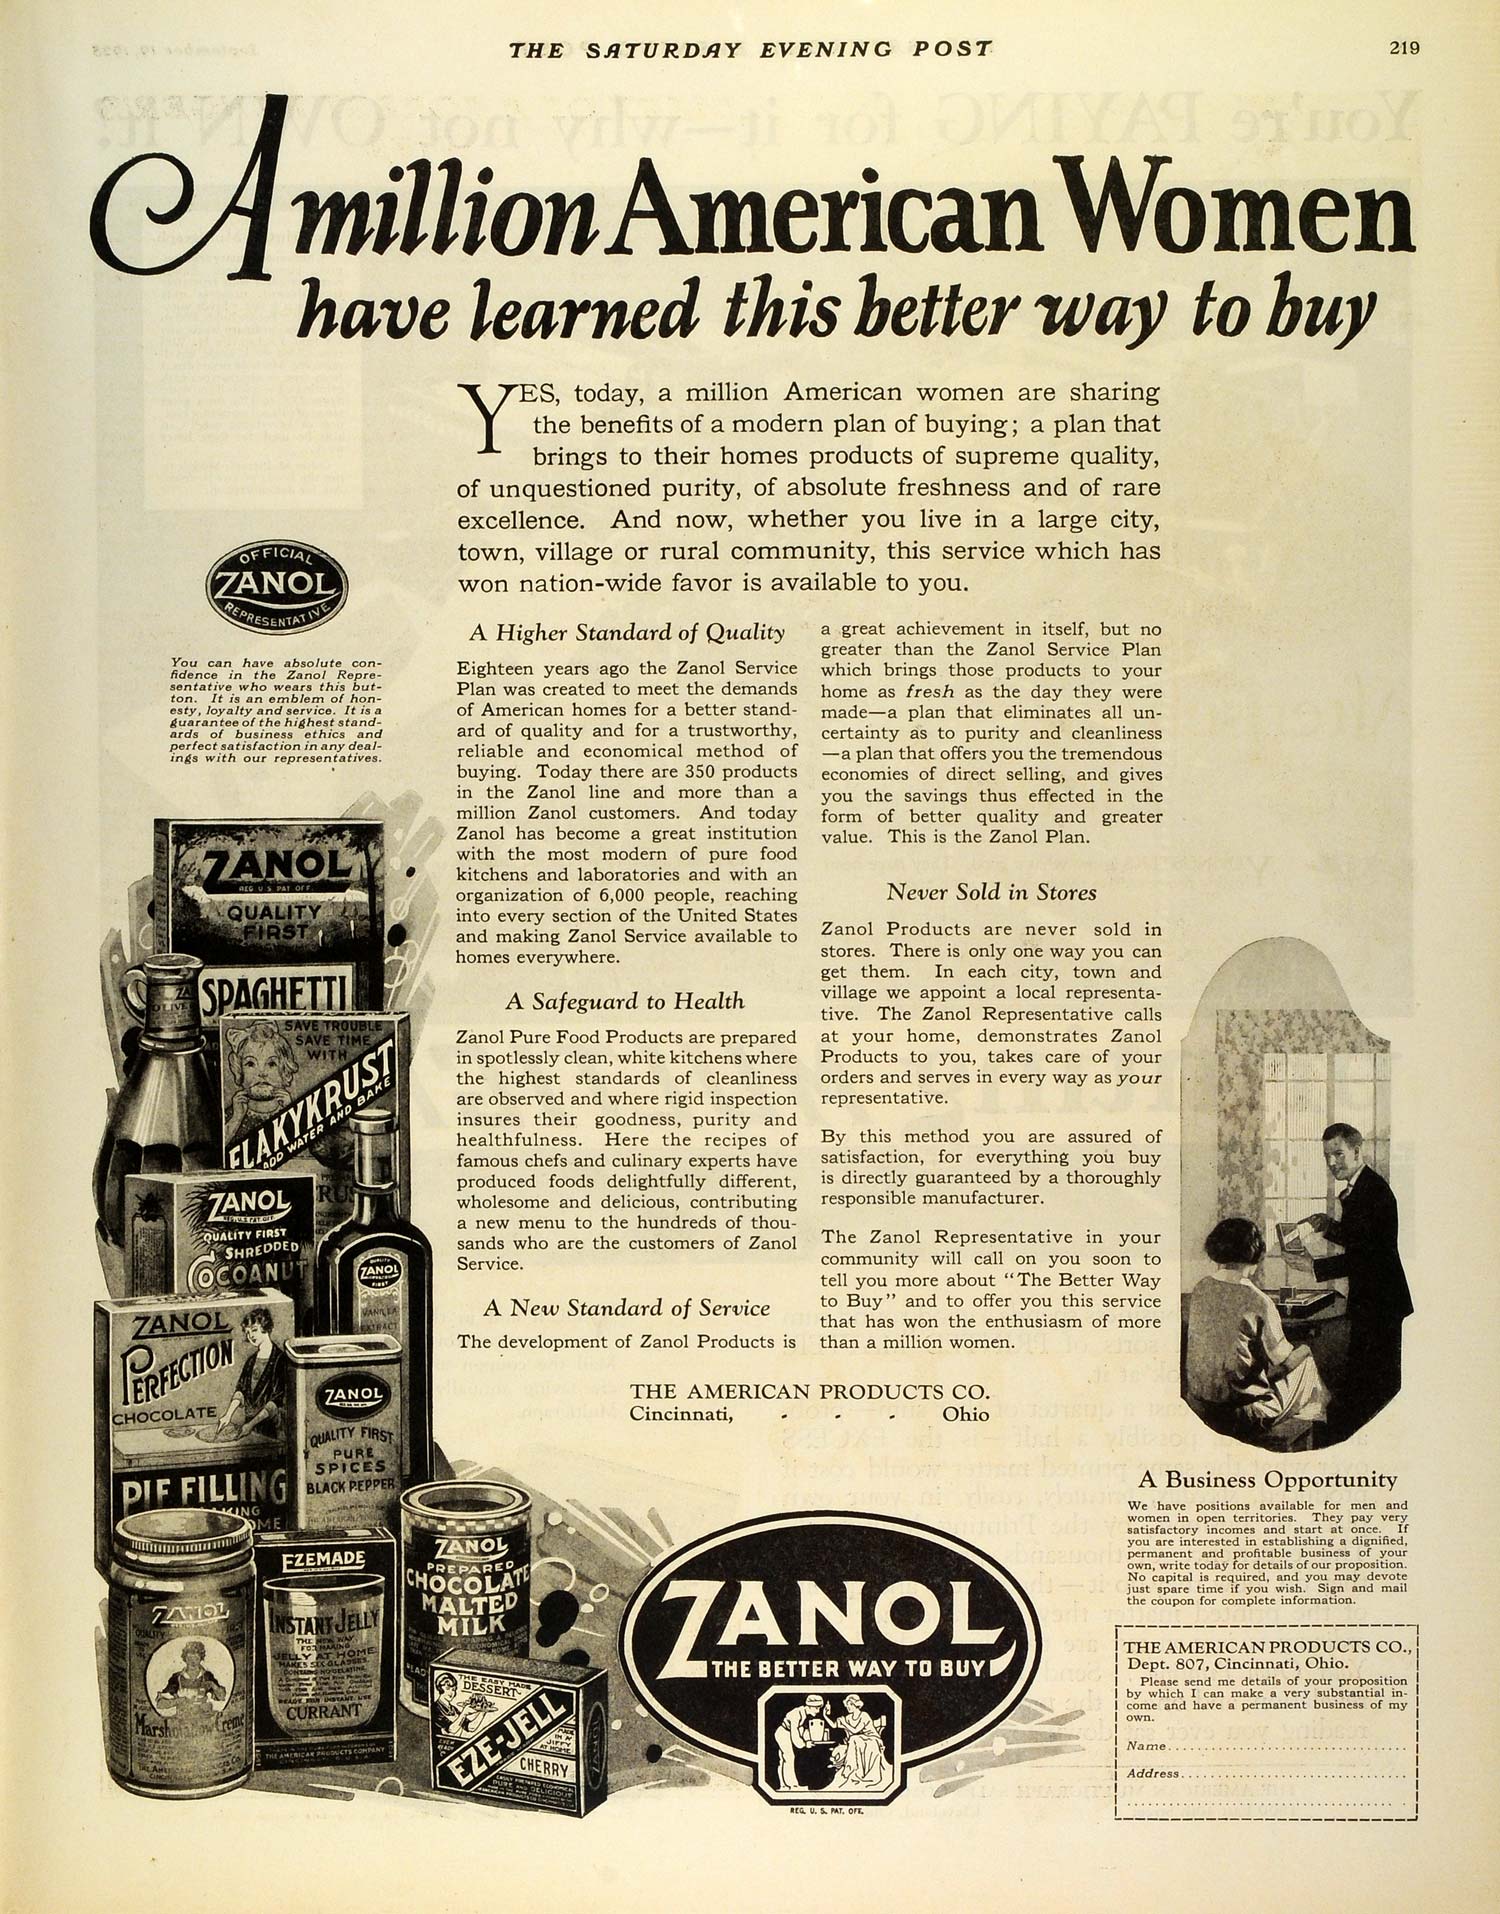 1925 Ad Zanol Products Representatives Food Spice Extract Chocolate Eze SEP5